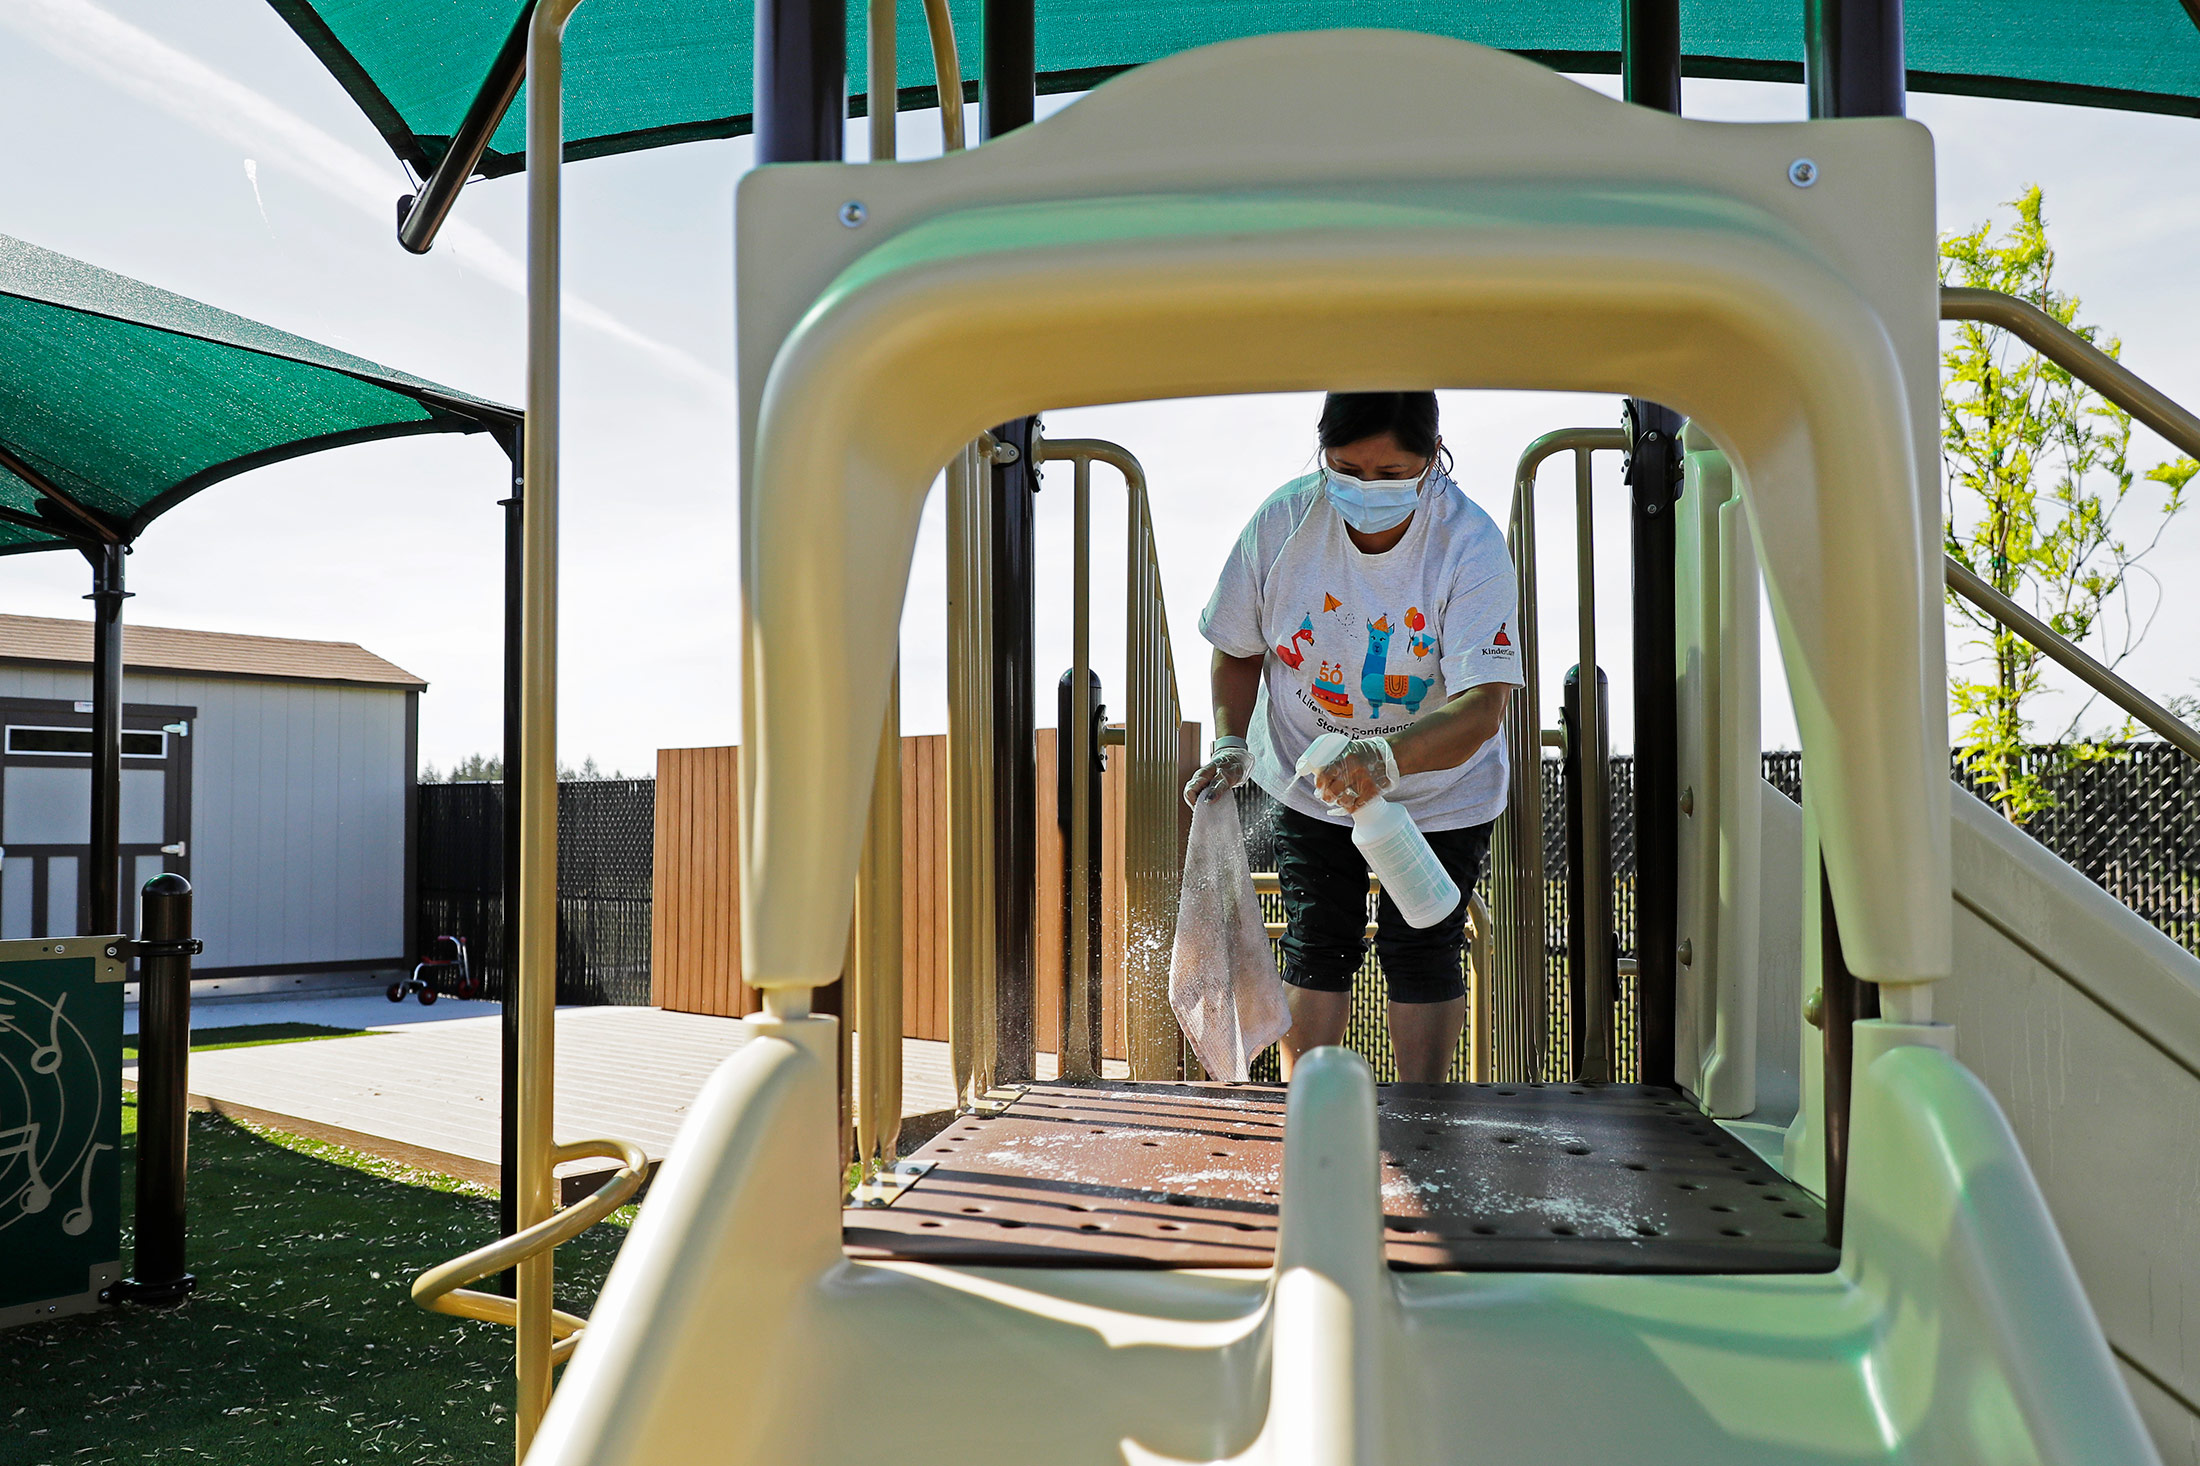 A&nbsp;worker cleans playground equipment at a daycare center in Tacoma, Washington, on May 27.&nbsp;